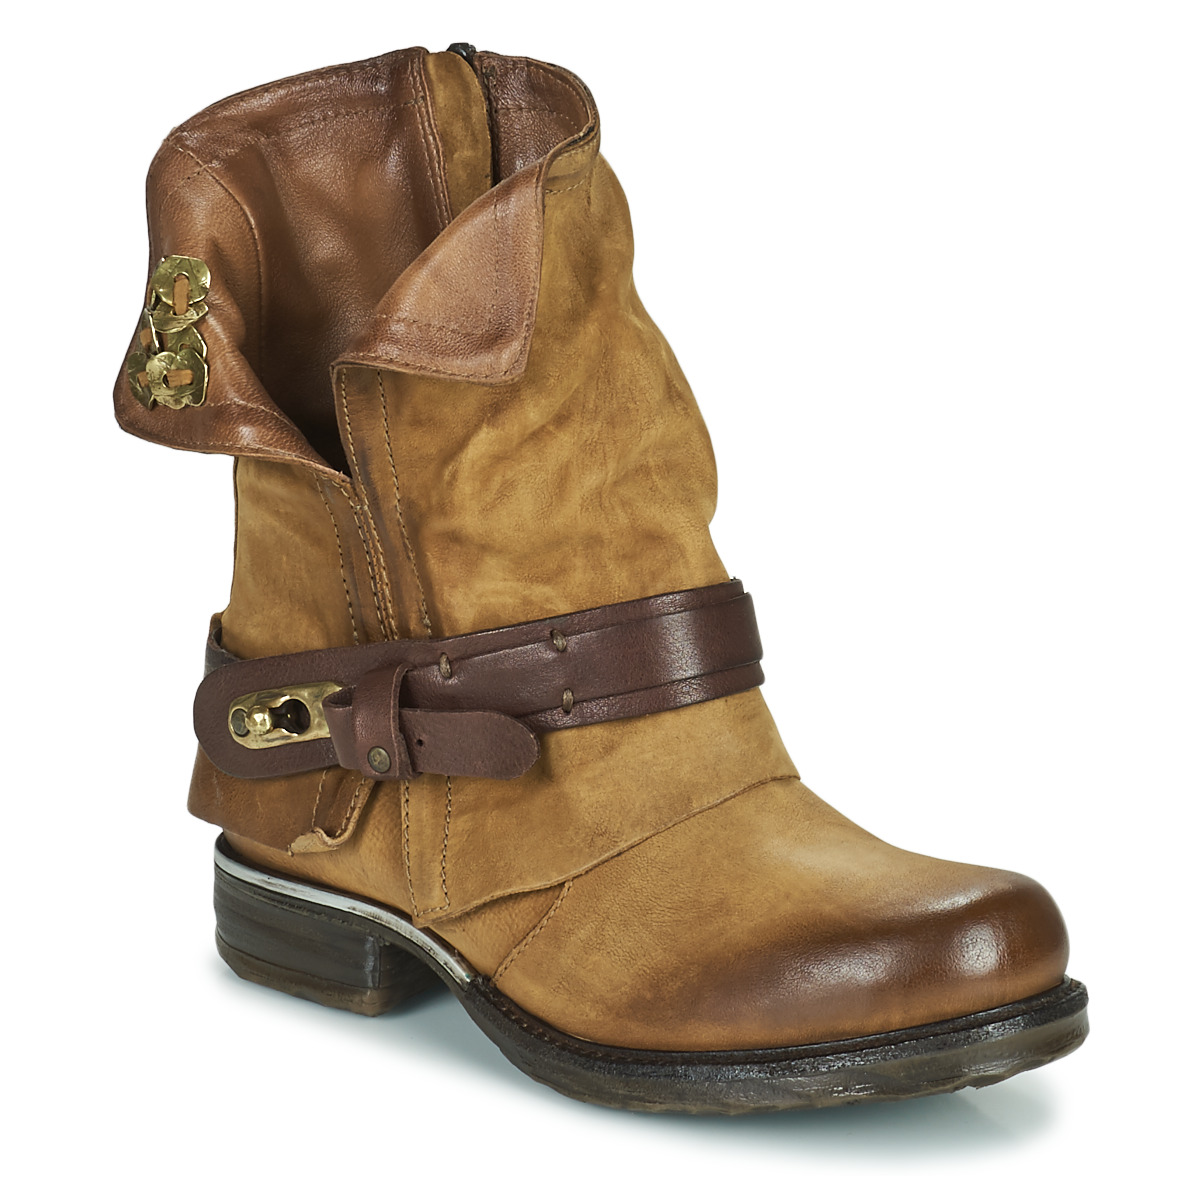 airstep / a.s.98  saint bike  women's mid boots in brown